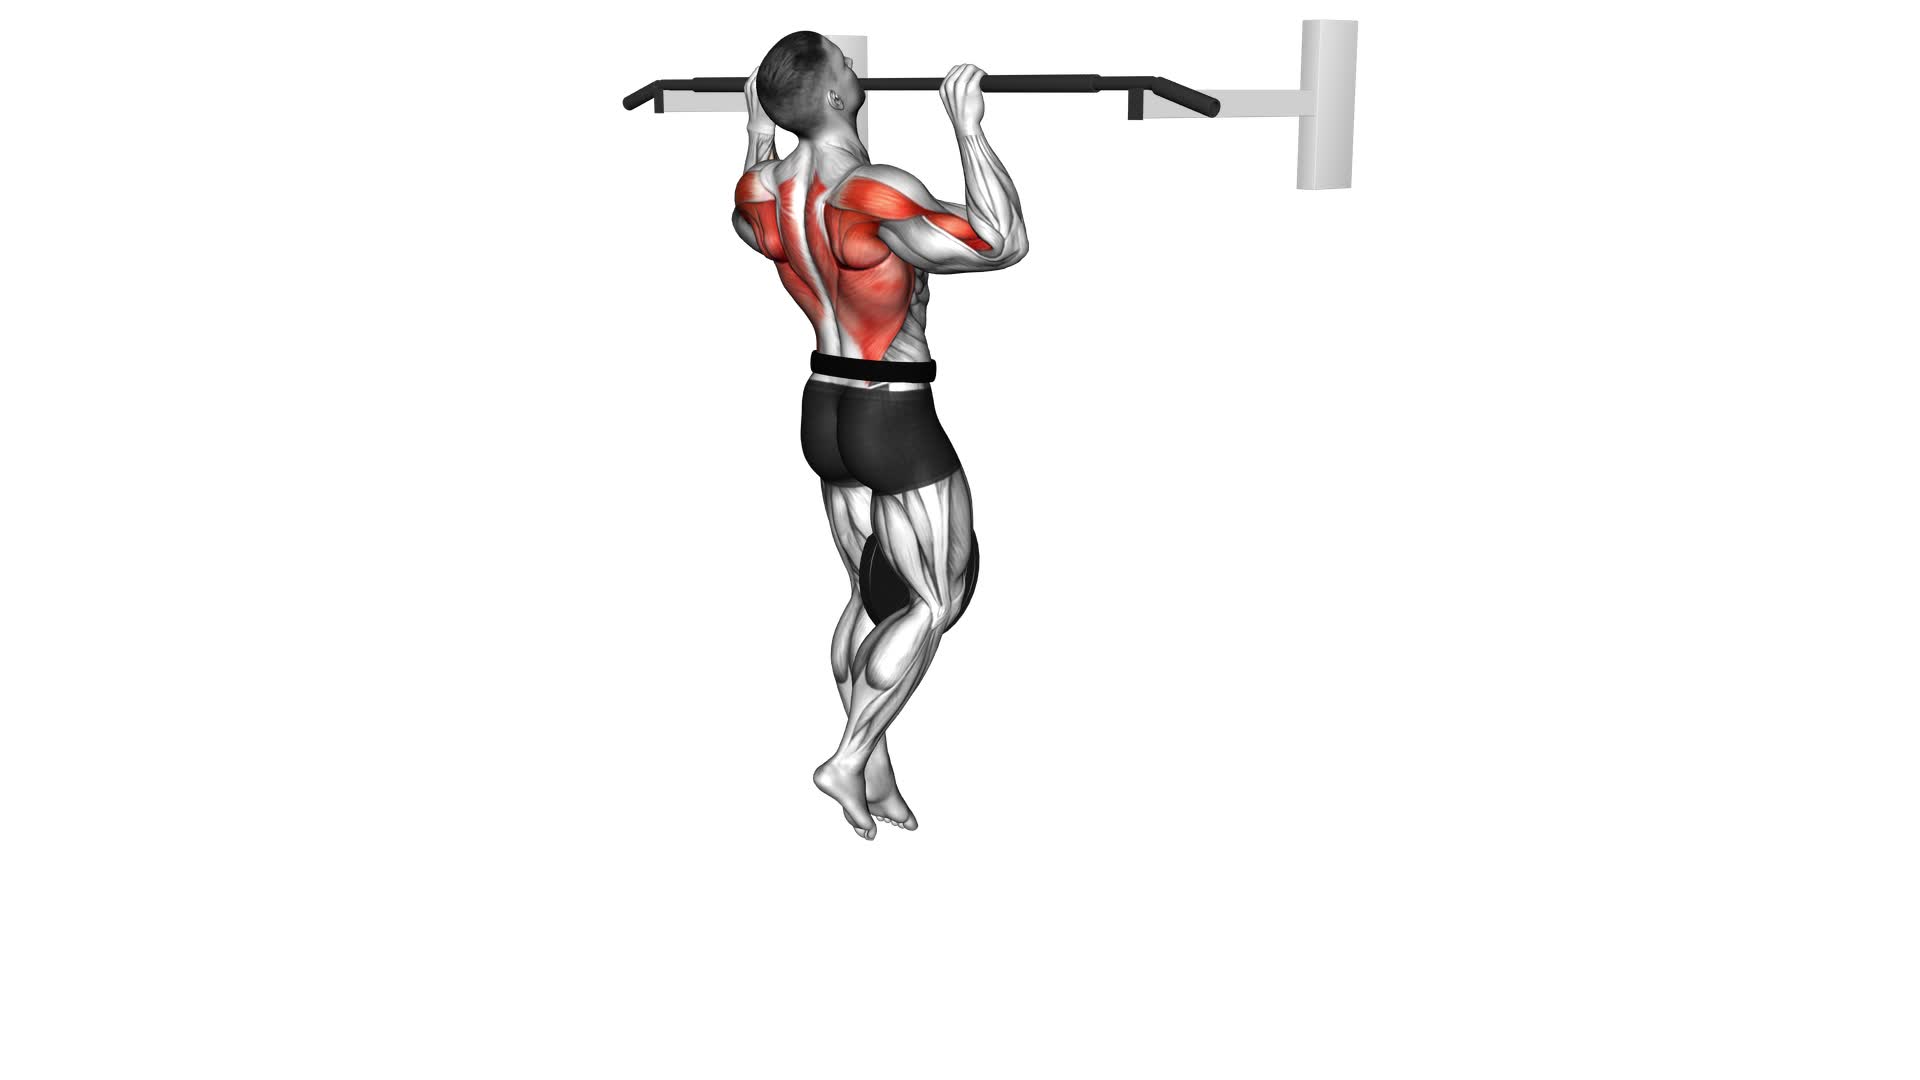 Weighted Pull-up - Video Exercise Guide & Tips